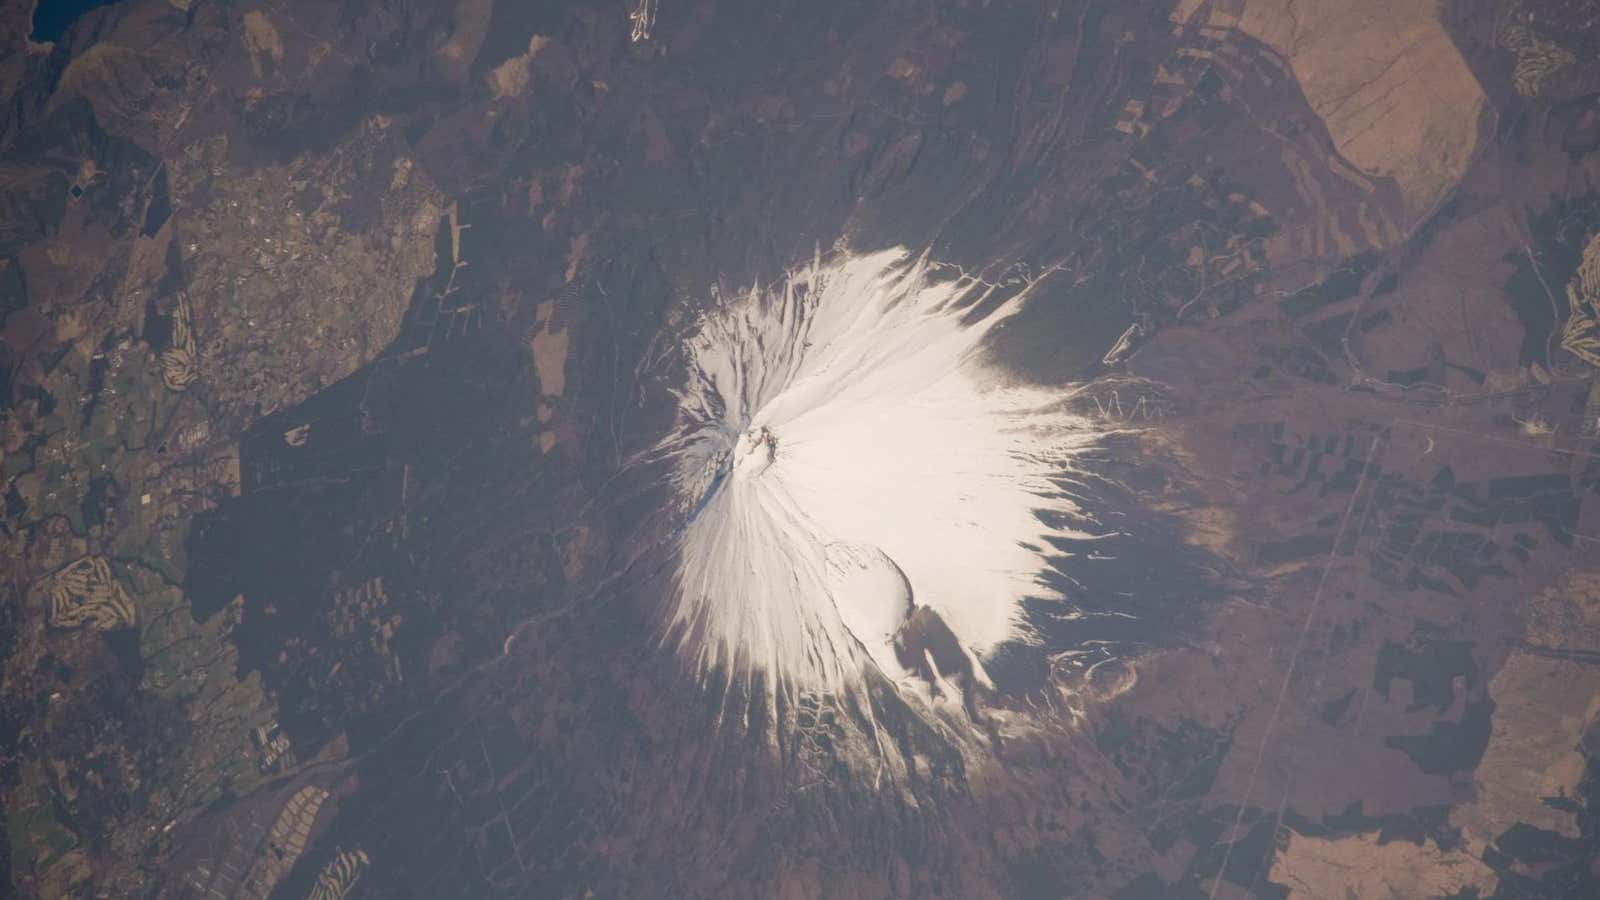 Mount Fuji seen from the International Space Station in 2009.